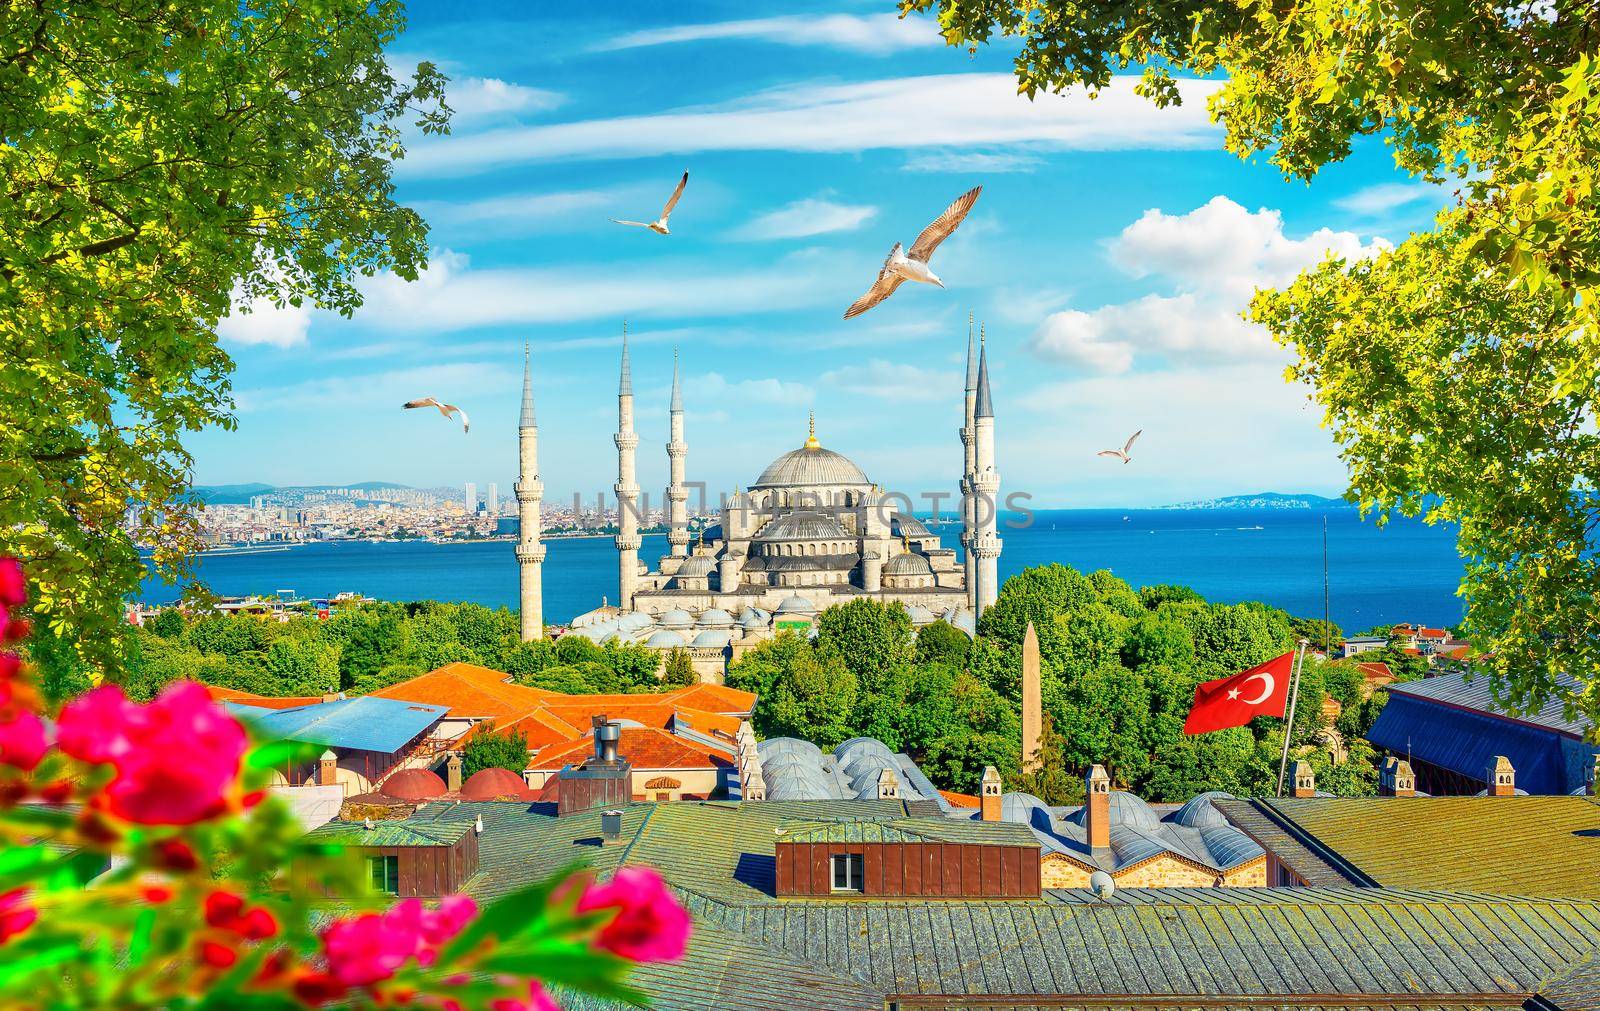 Blue Mosque and Bosphorus in Istanbul, Turkey